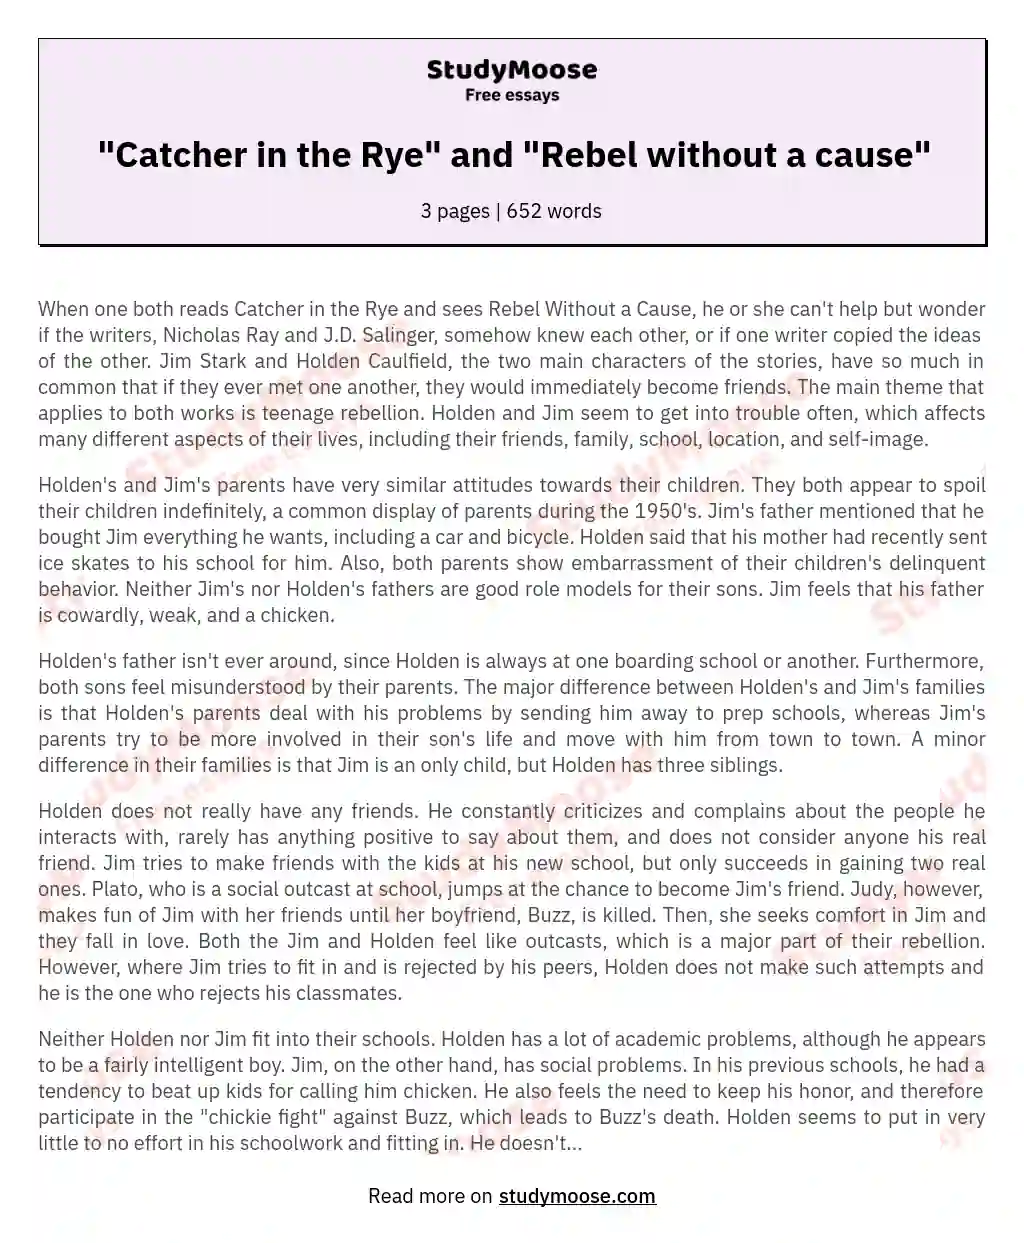 "Catcher in the Rye" and "Rebel without a cause"